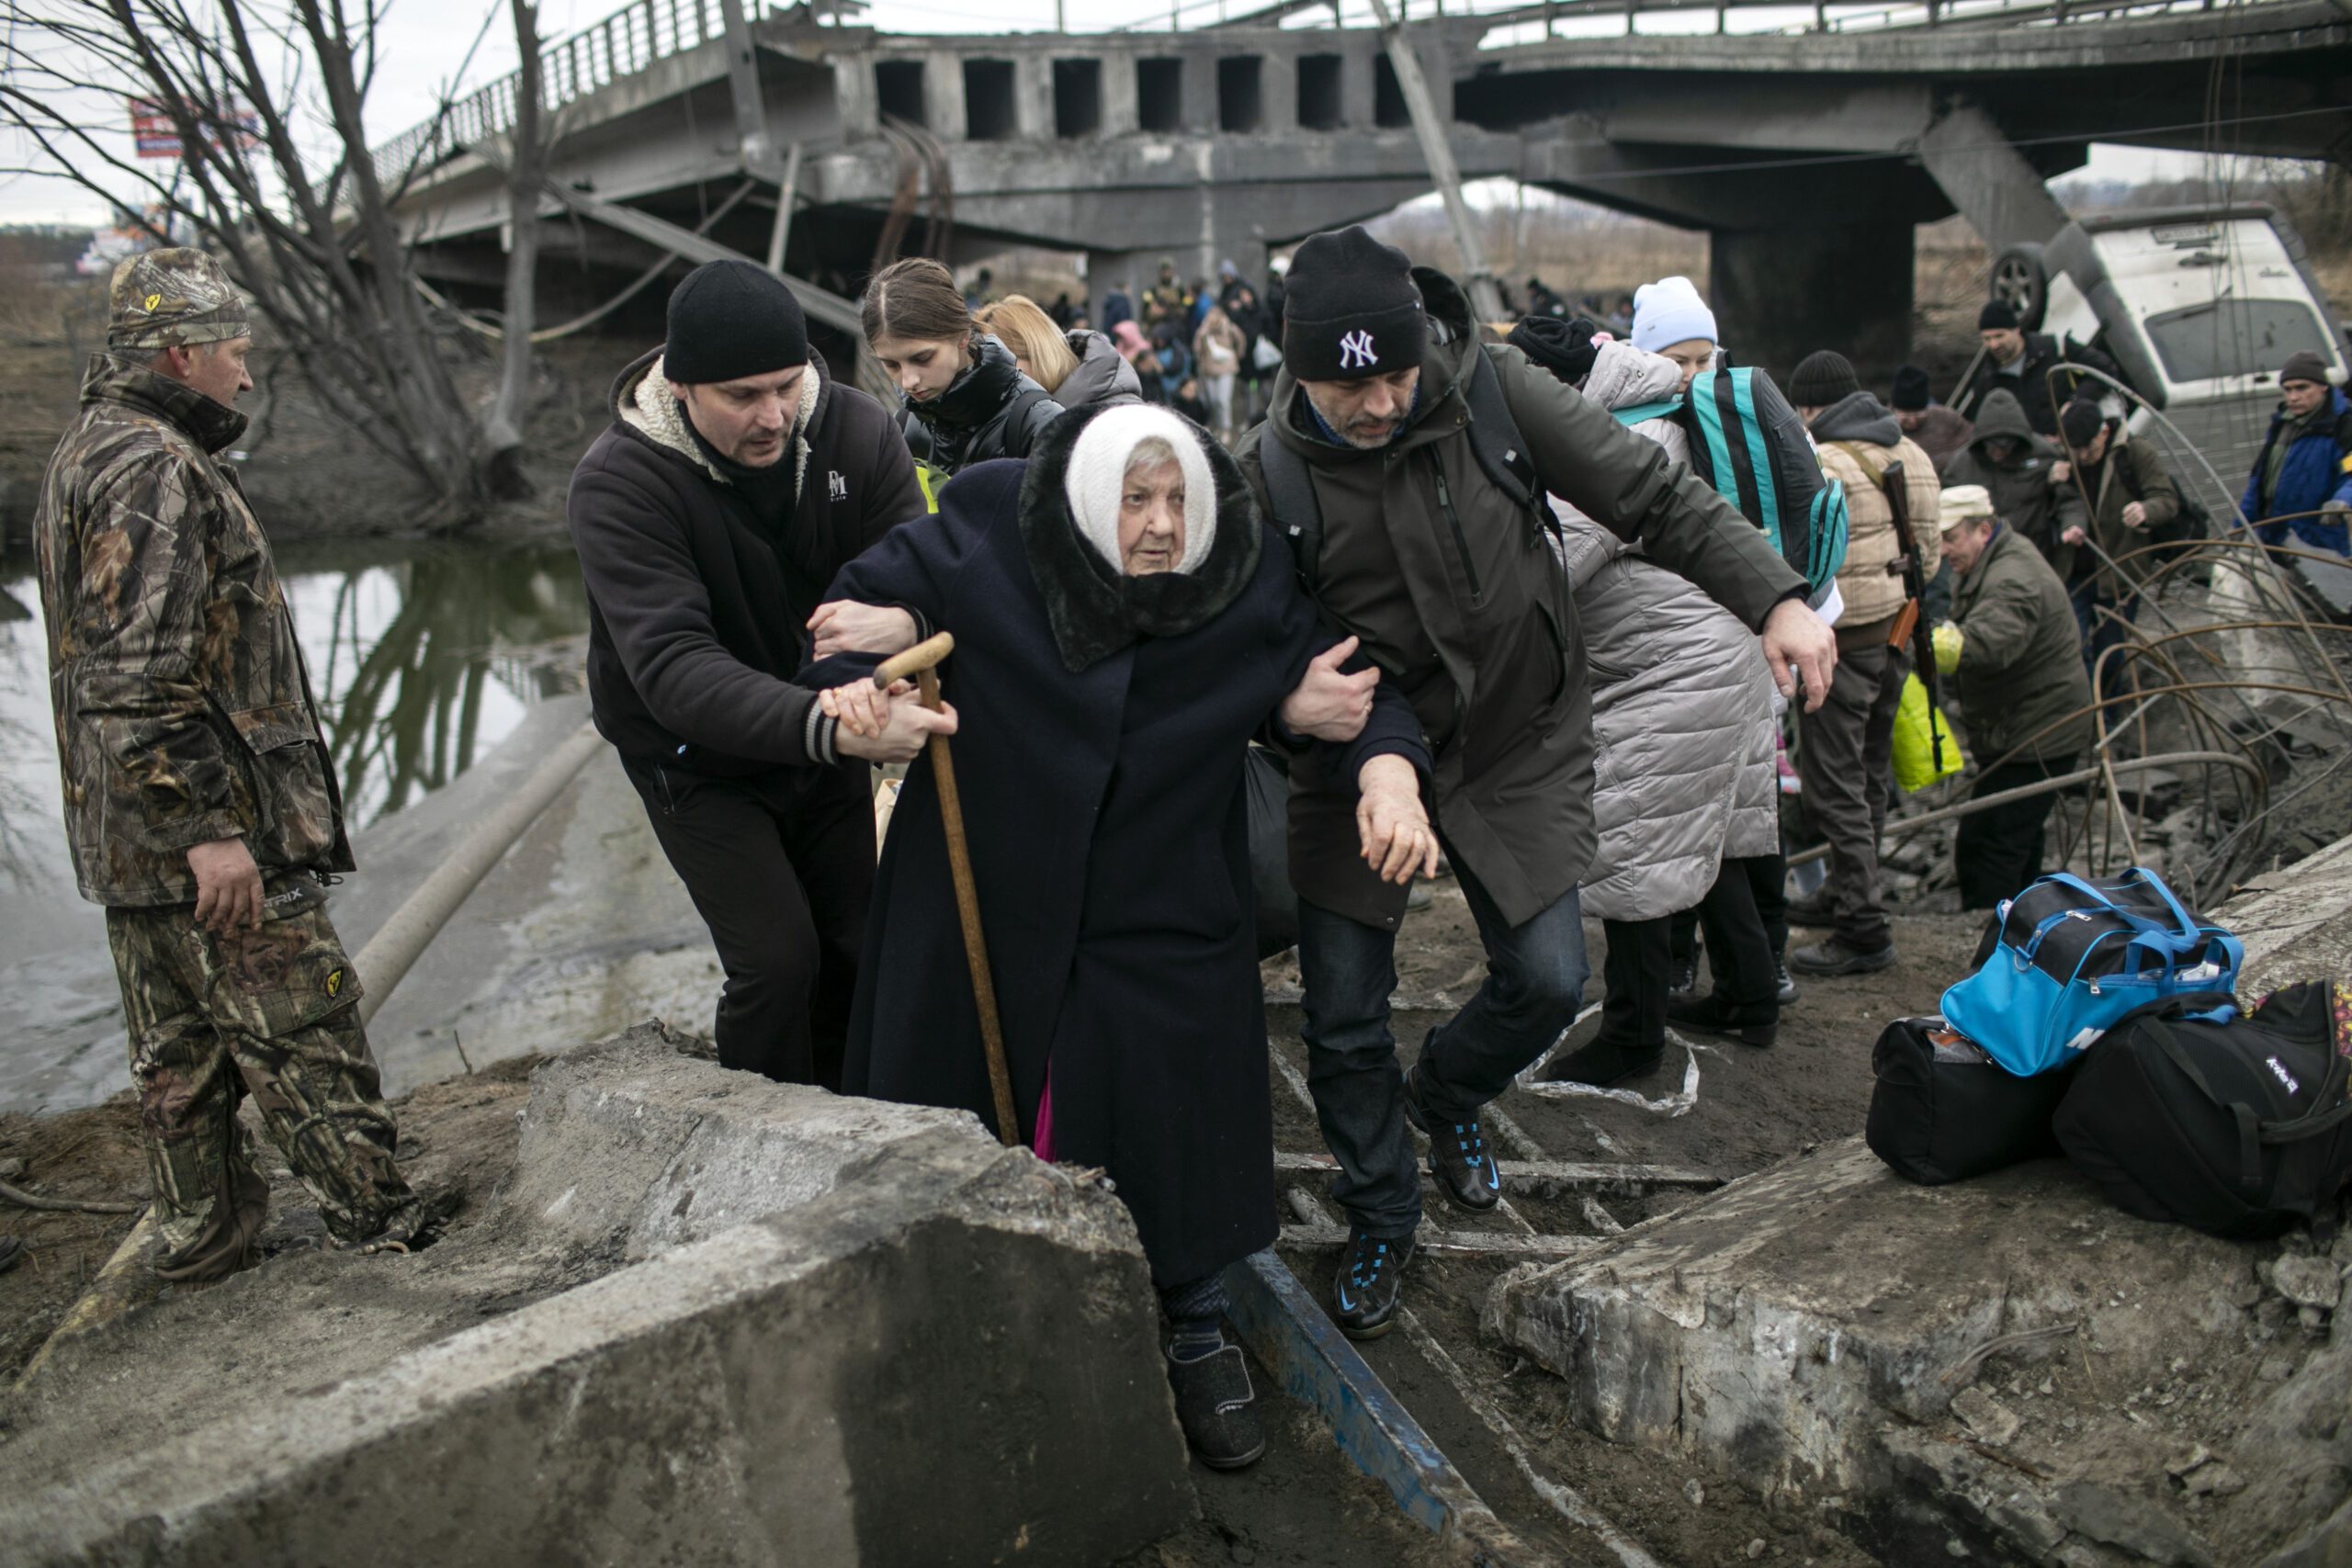 Civilians cross a destroyed bridge as they flee the city of Irpin, Kiev, Ukraine, during heavy bombardment by the Russian Army, March 5, 2022. (Photo Credit: AG)

Image may be used in any HIAS materials, print and digital, until March 8, 2023. After this date, additional usage must be re-negotiated directly with photographer. No affiliate rights granted.